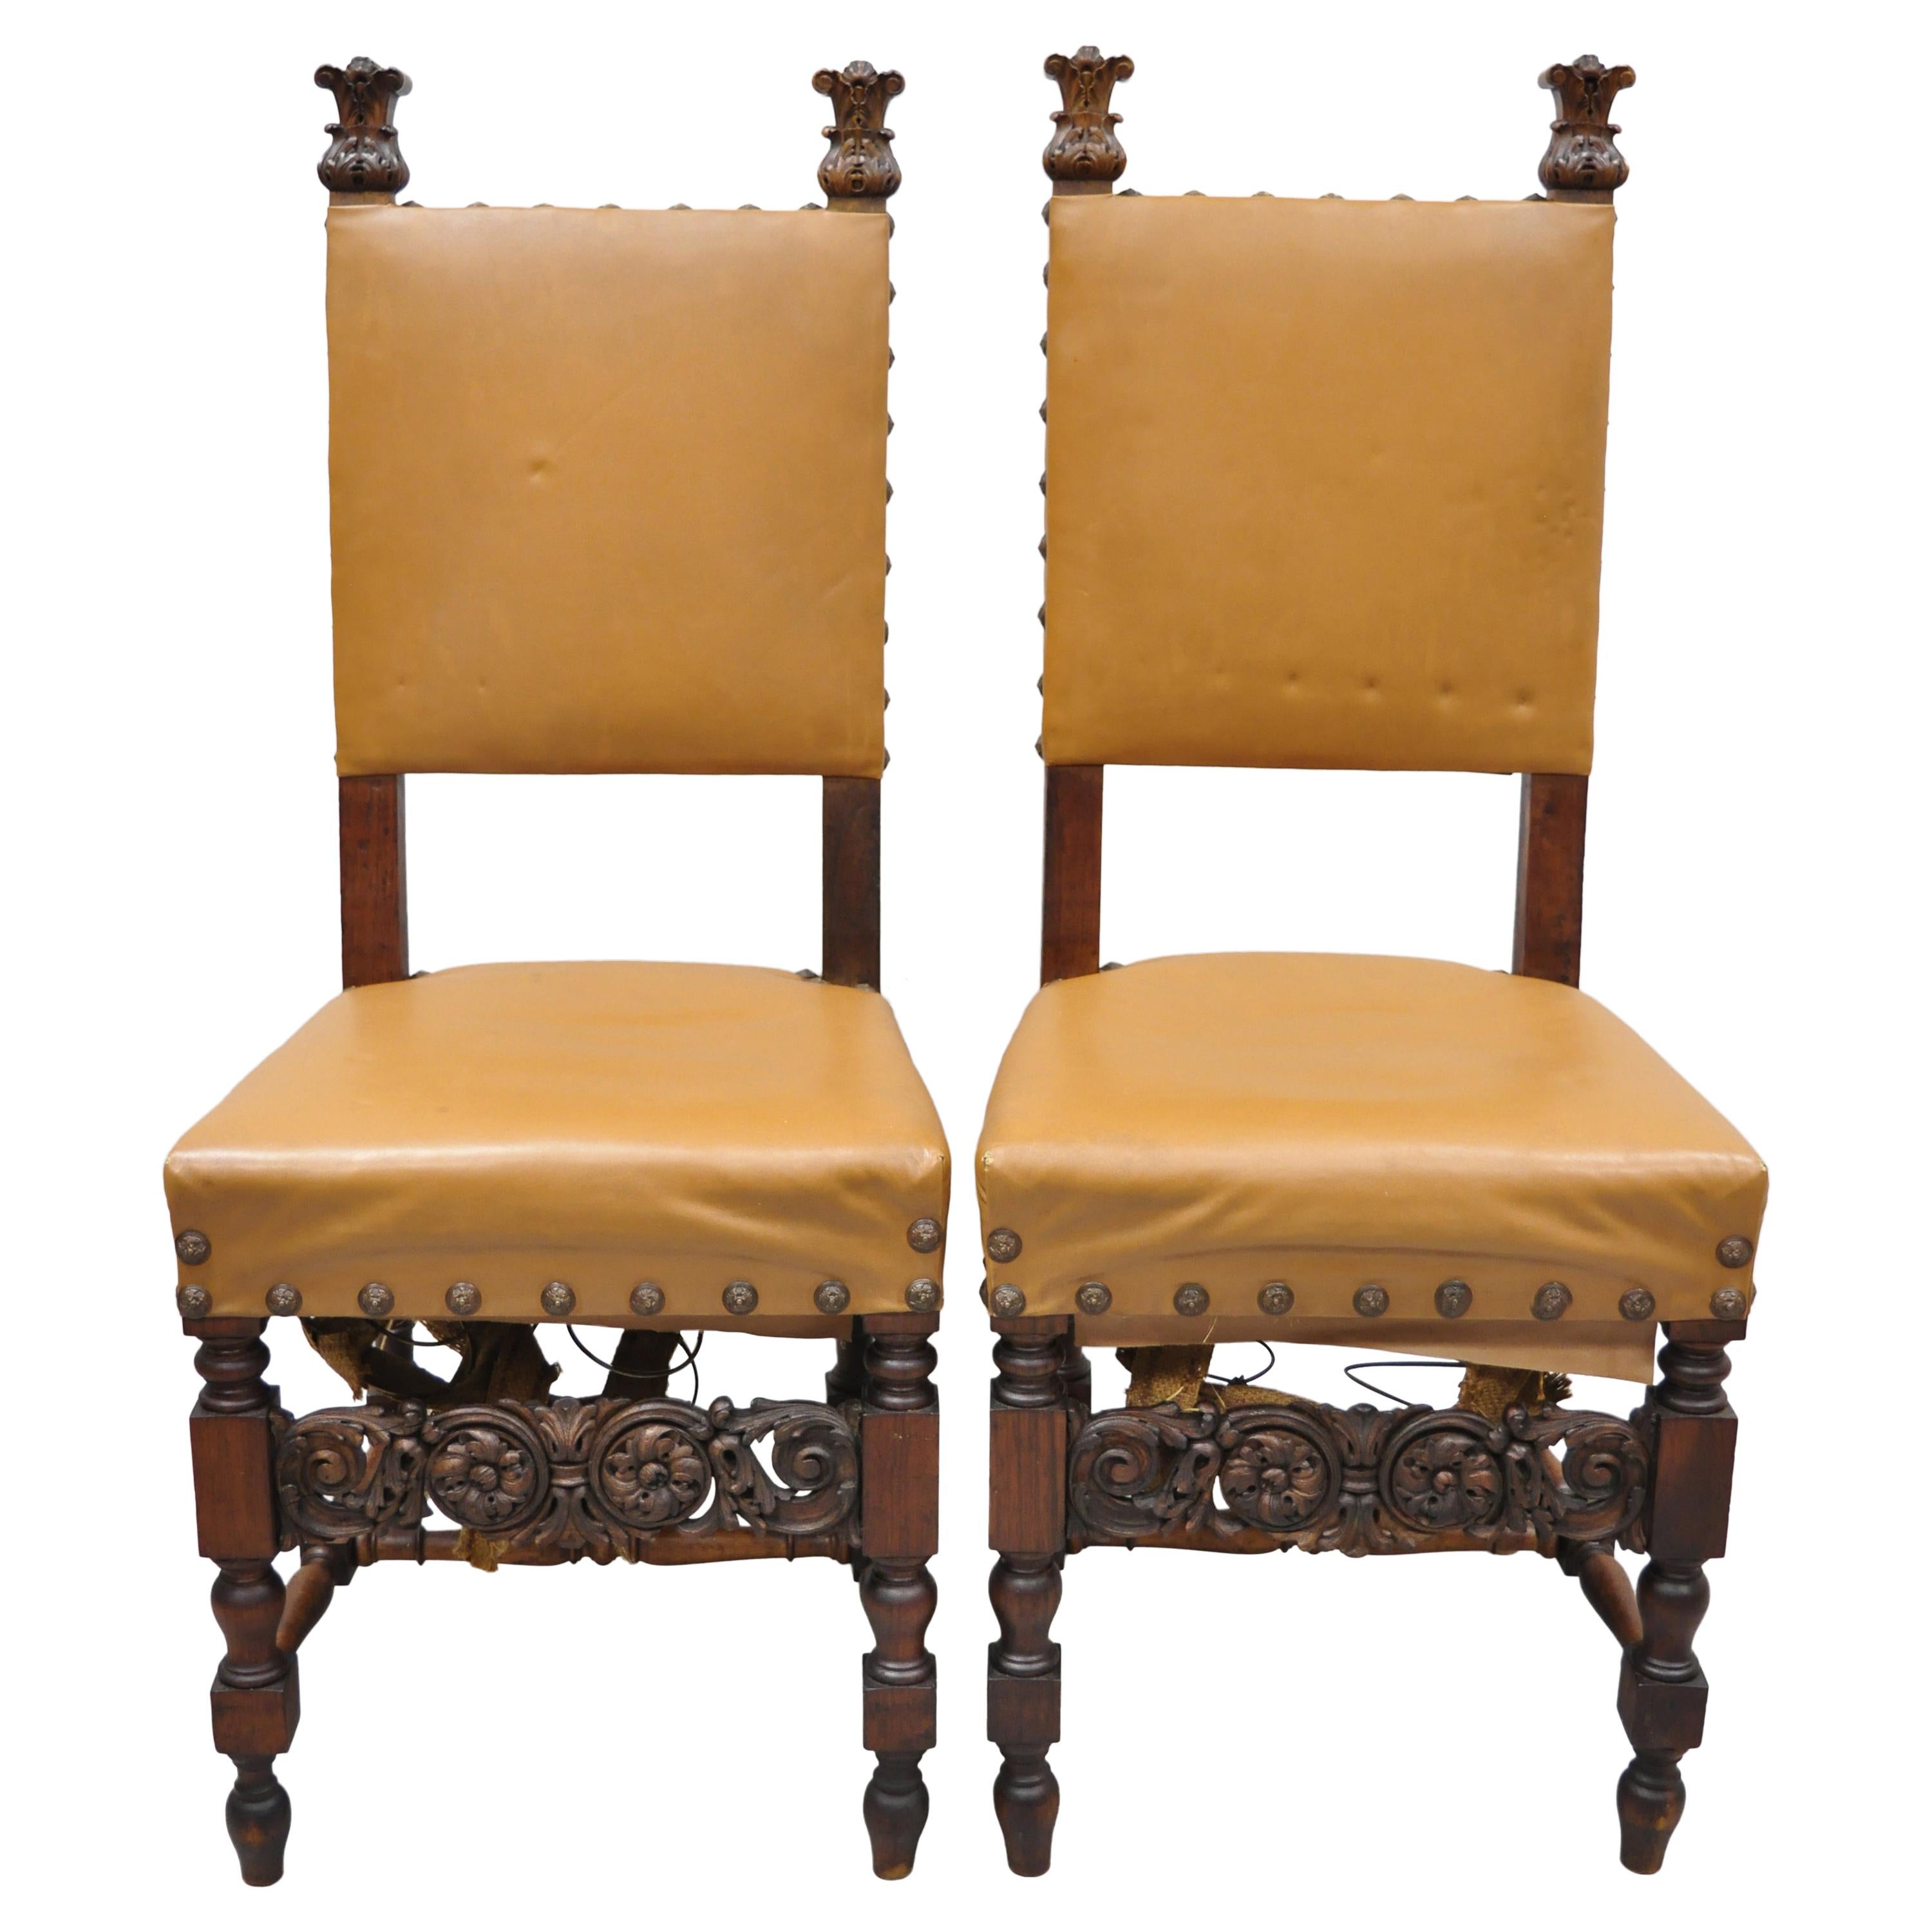 Pair of Antique Italian Renaissance Carved Walnut High Back Side Chairs For Sale